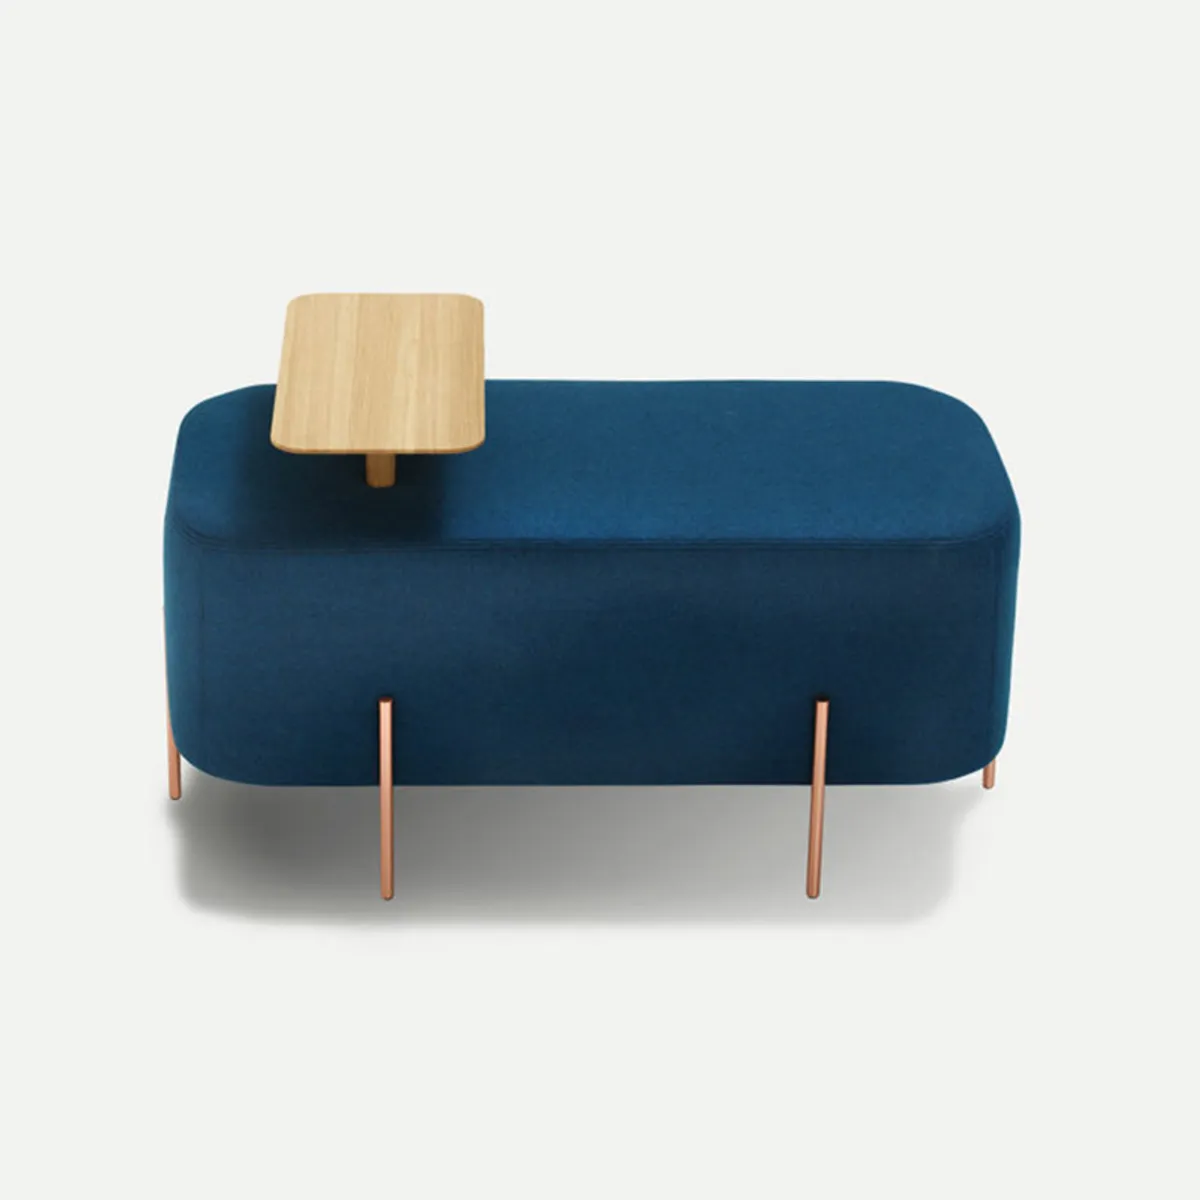 Elephant Bench In Blue With Side Table Modular Office Furniture By Insideoutcontracts